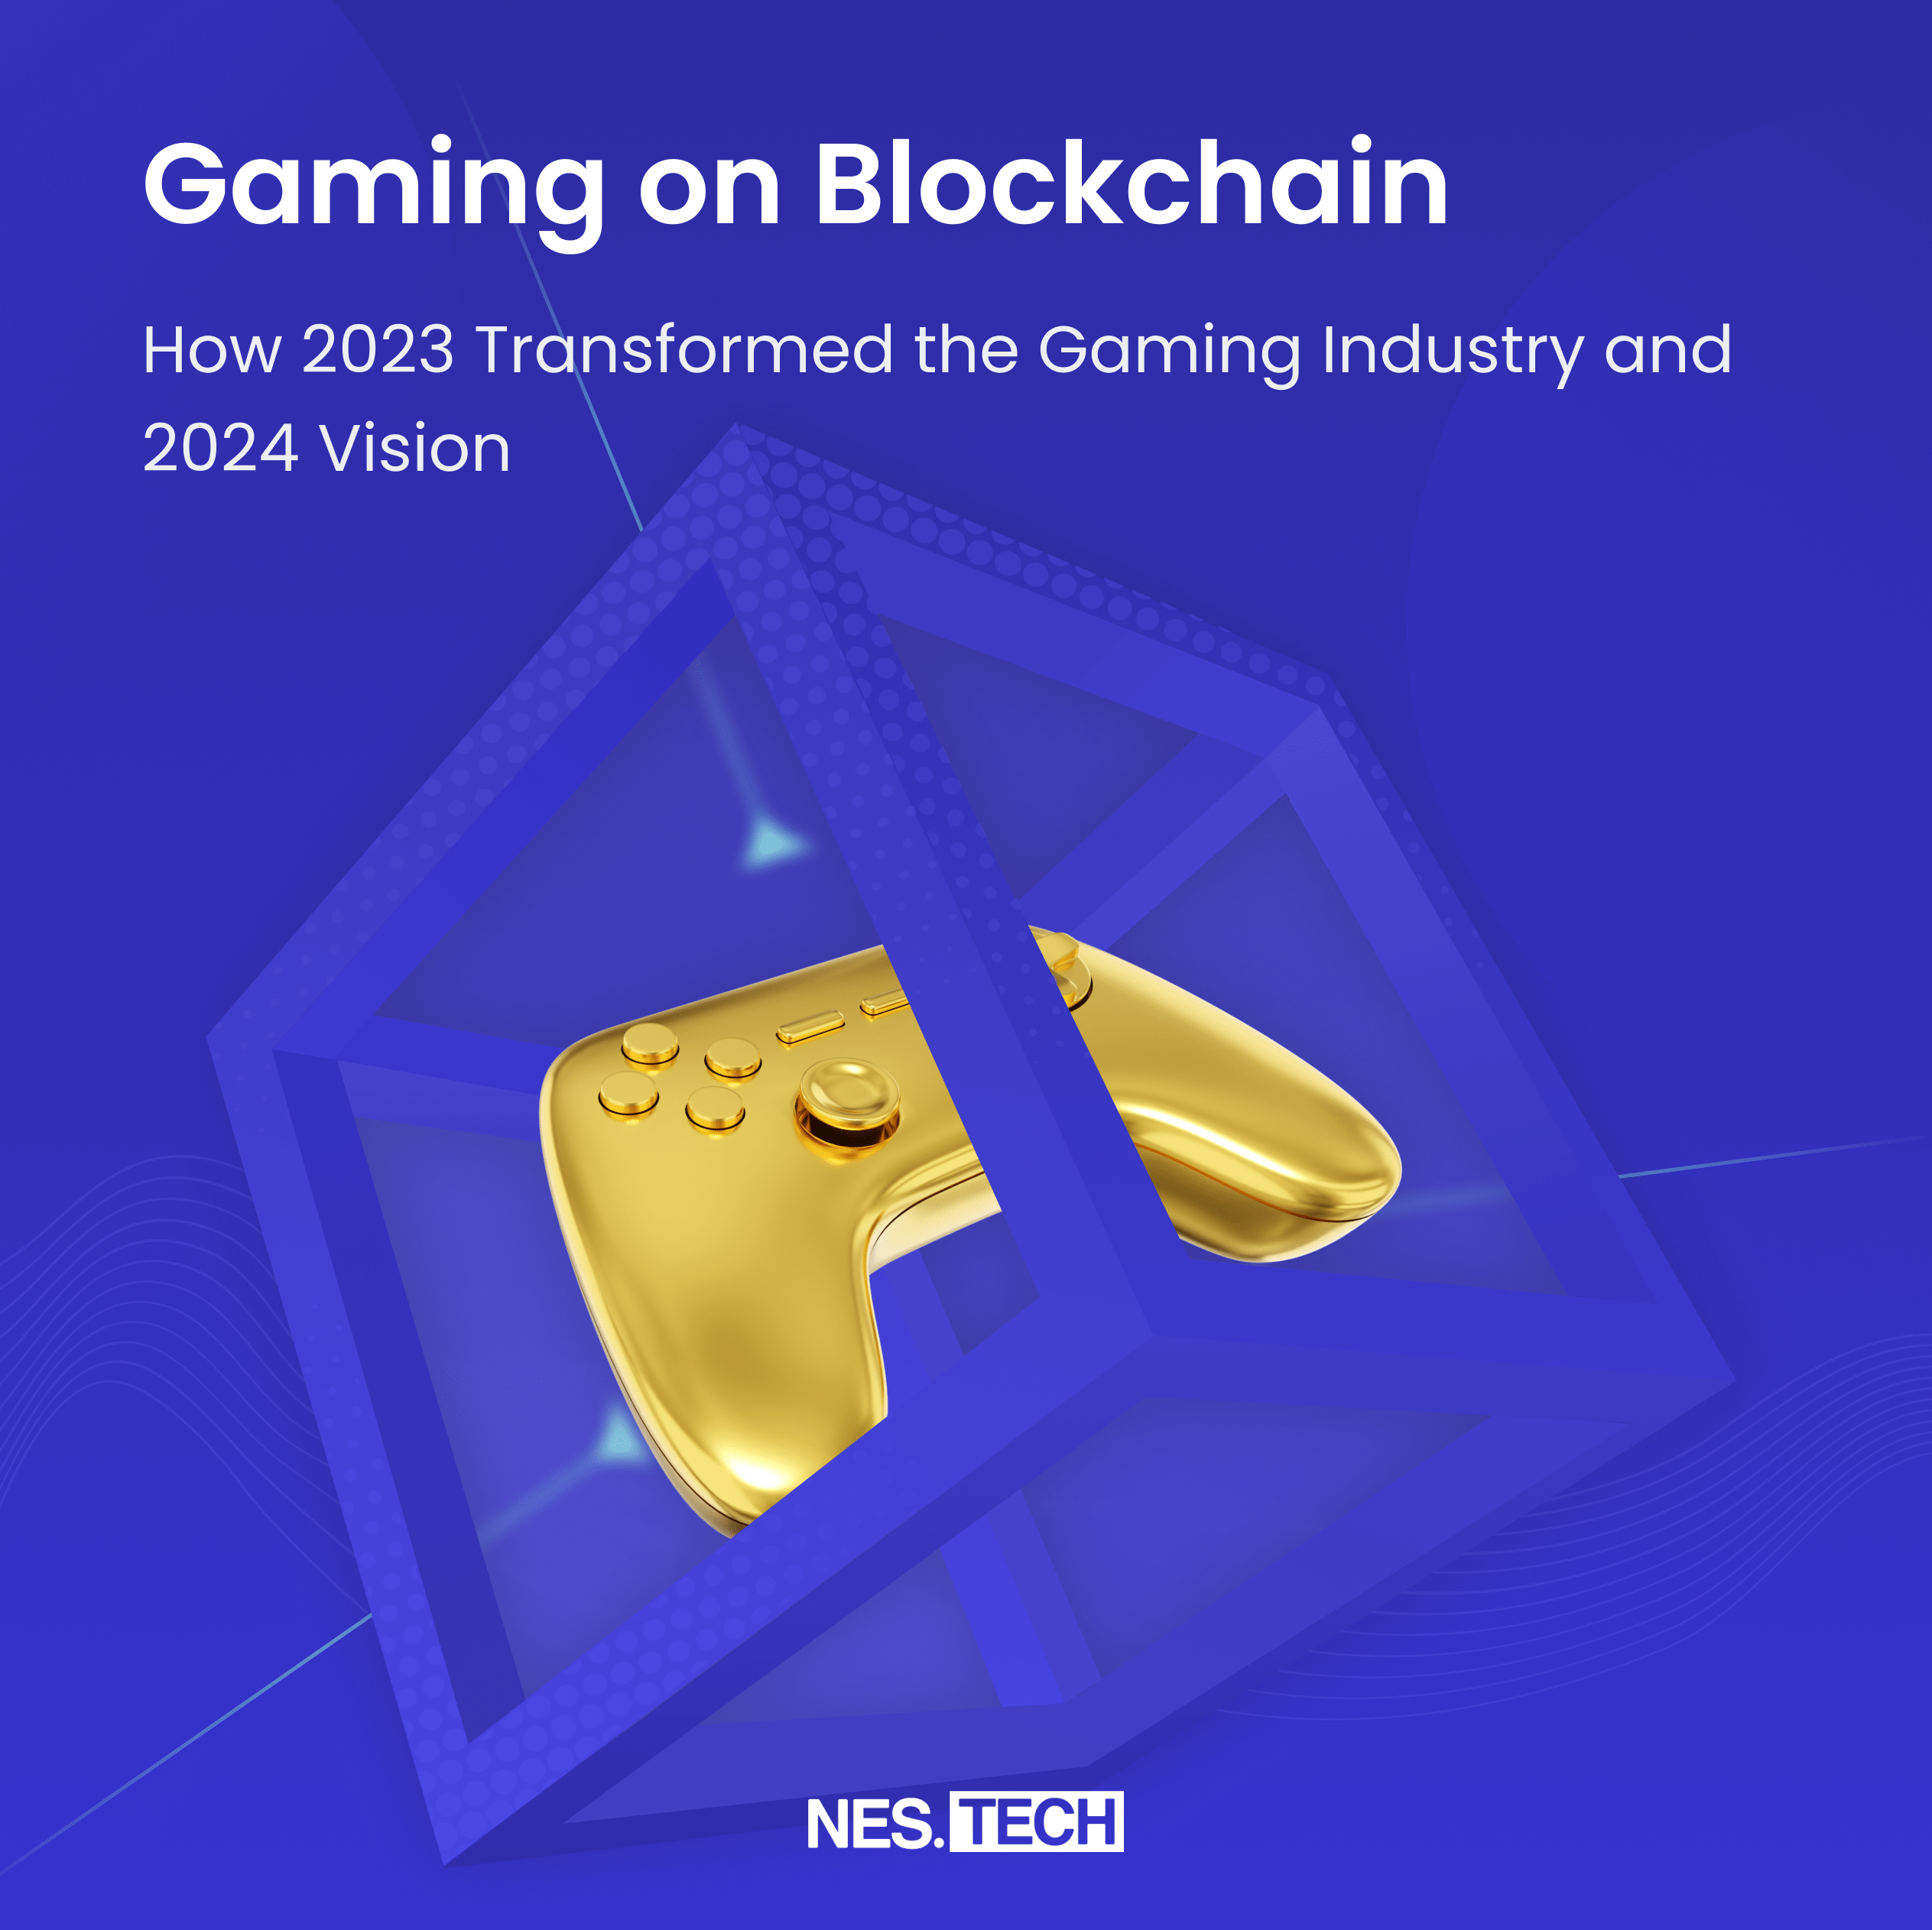 In 2024 New Vision For Blockchain Gaming: Let’s Play To Earn!